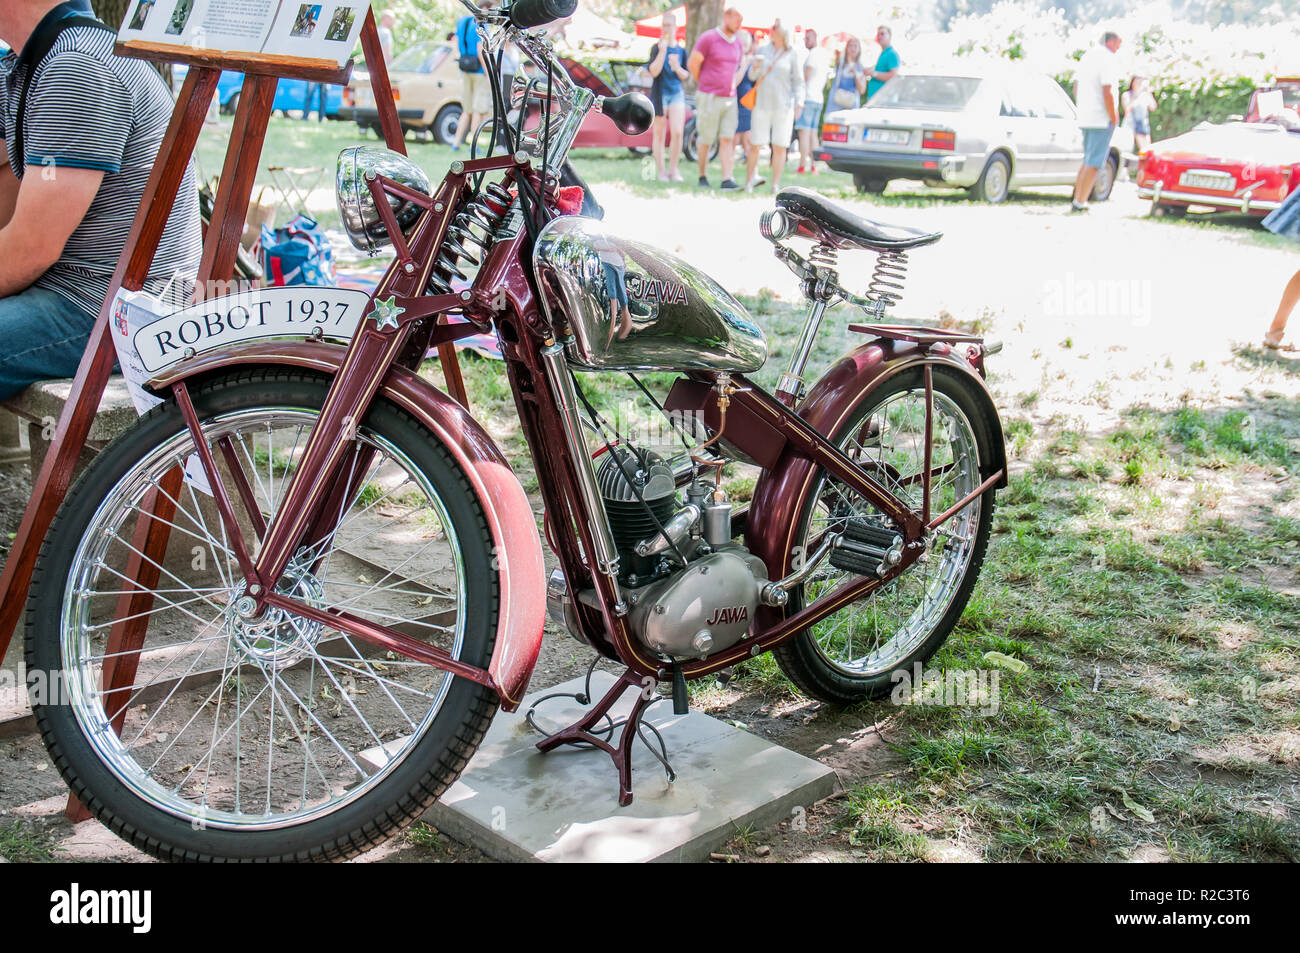 Jawa Motorcycle High Resolution Stock Photography and Images - Alamy